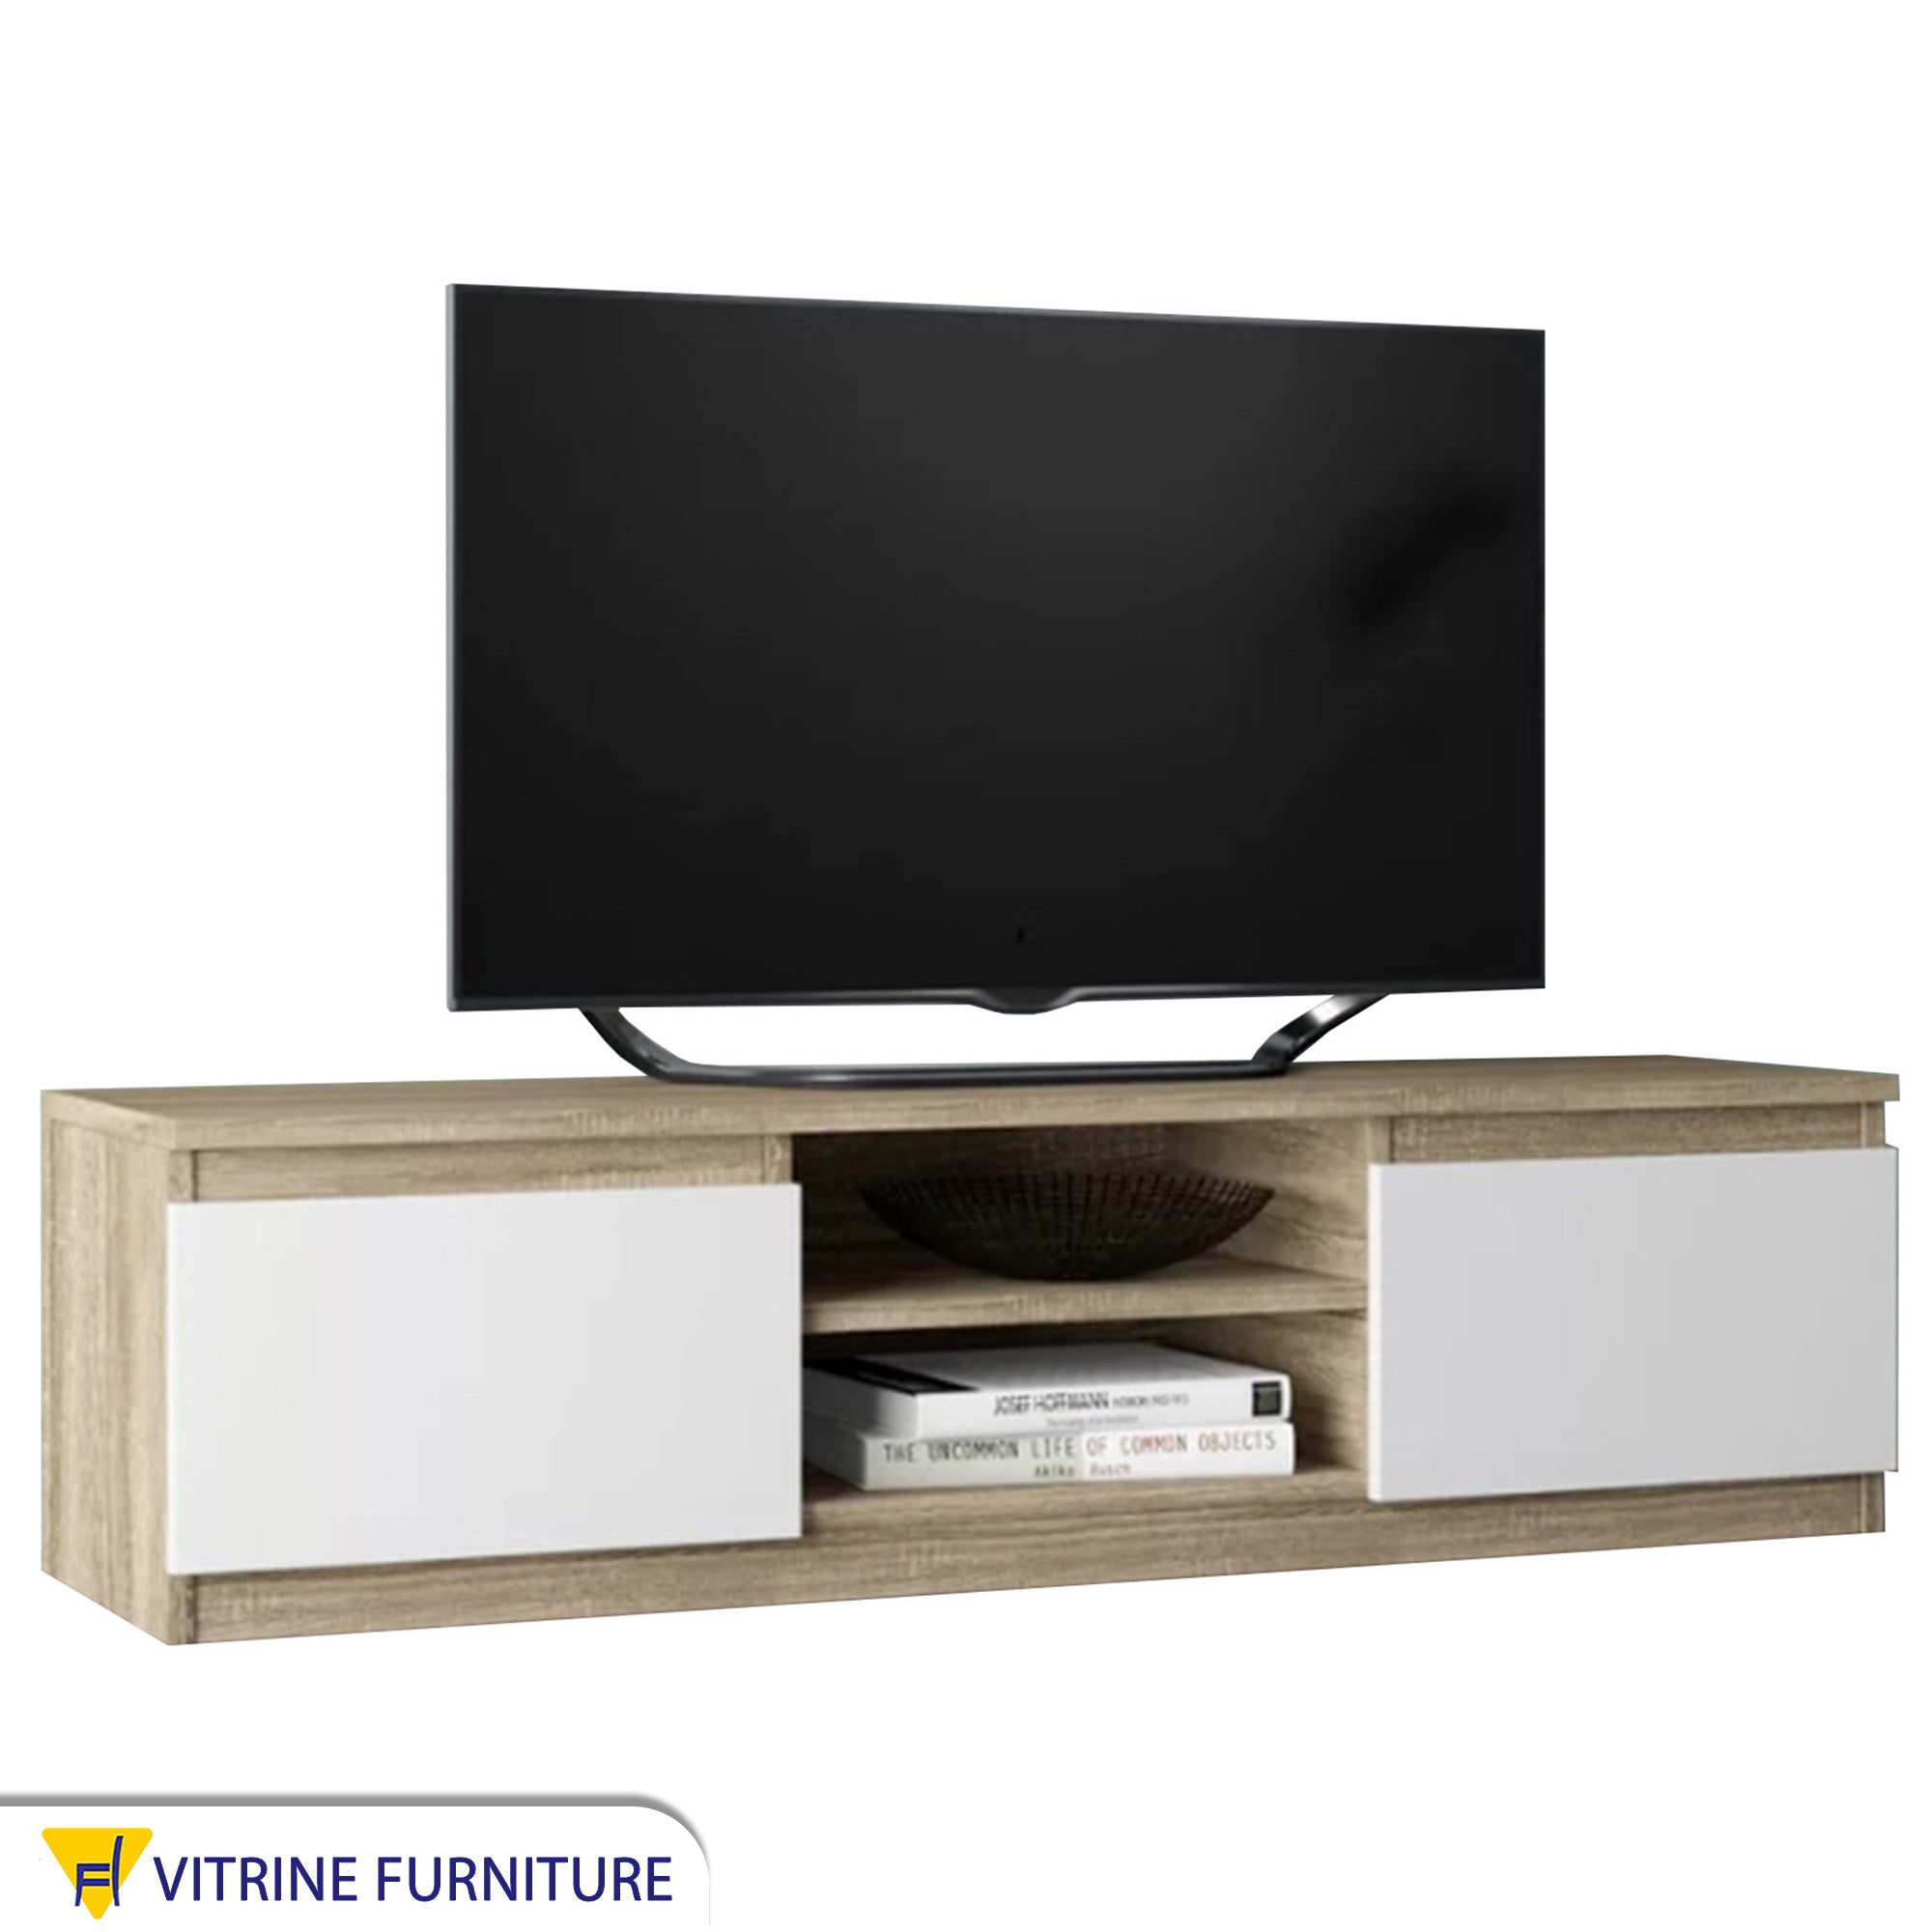 Beige wooden TV unit with white leaves